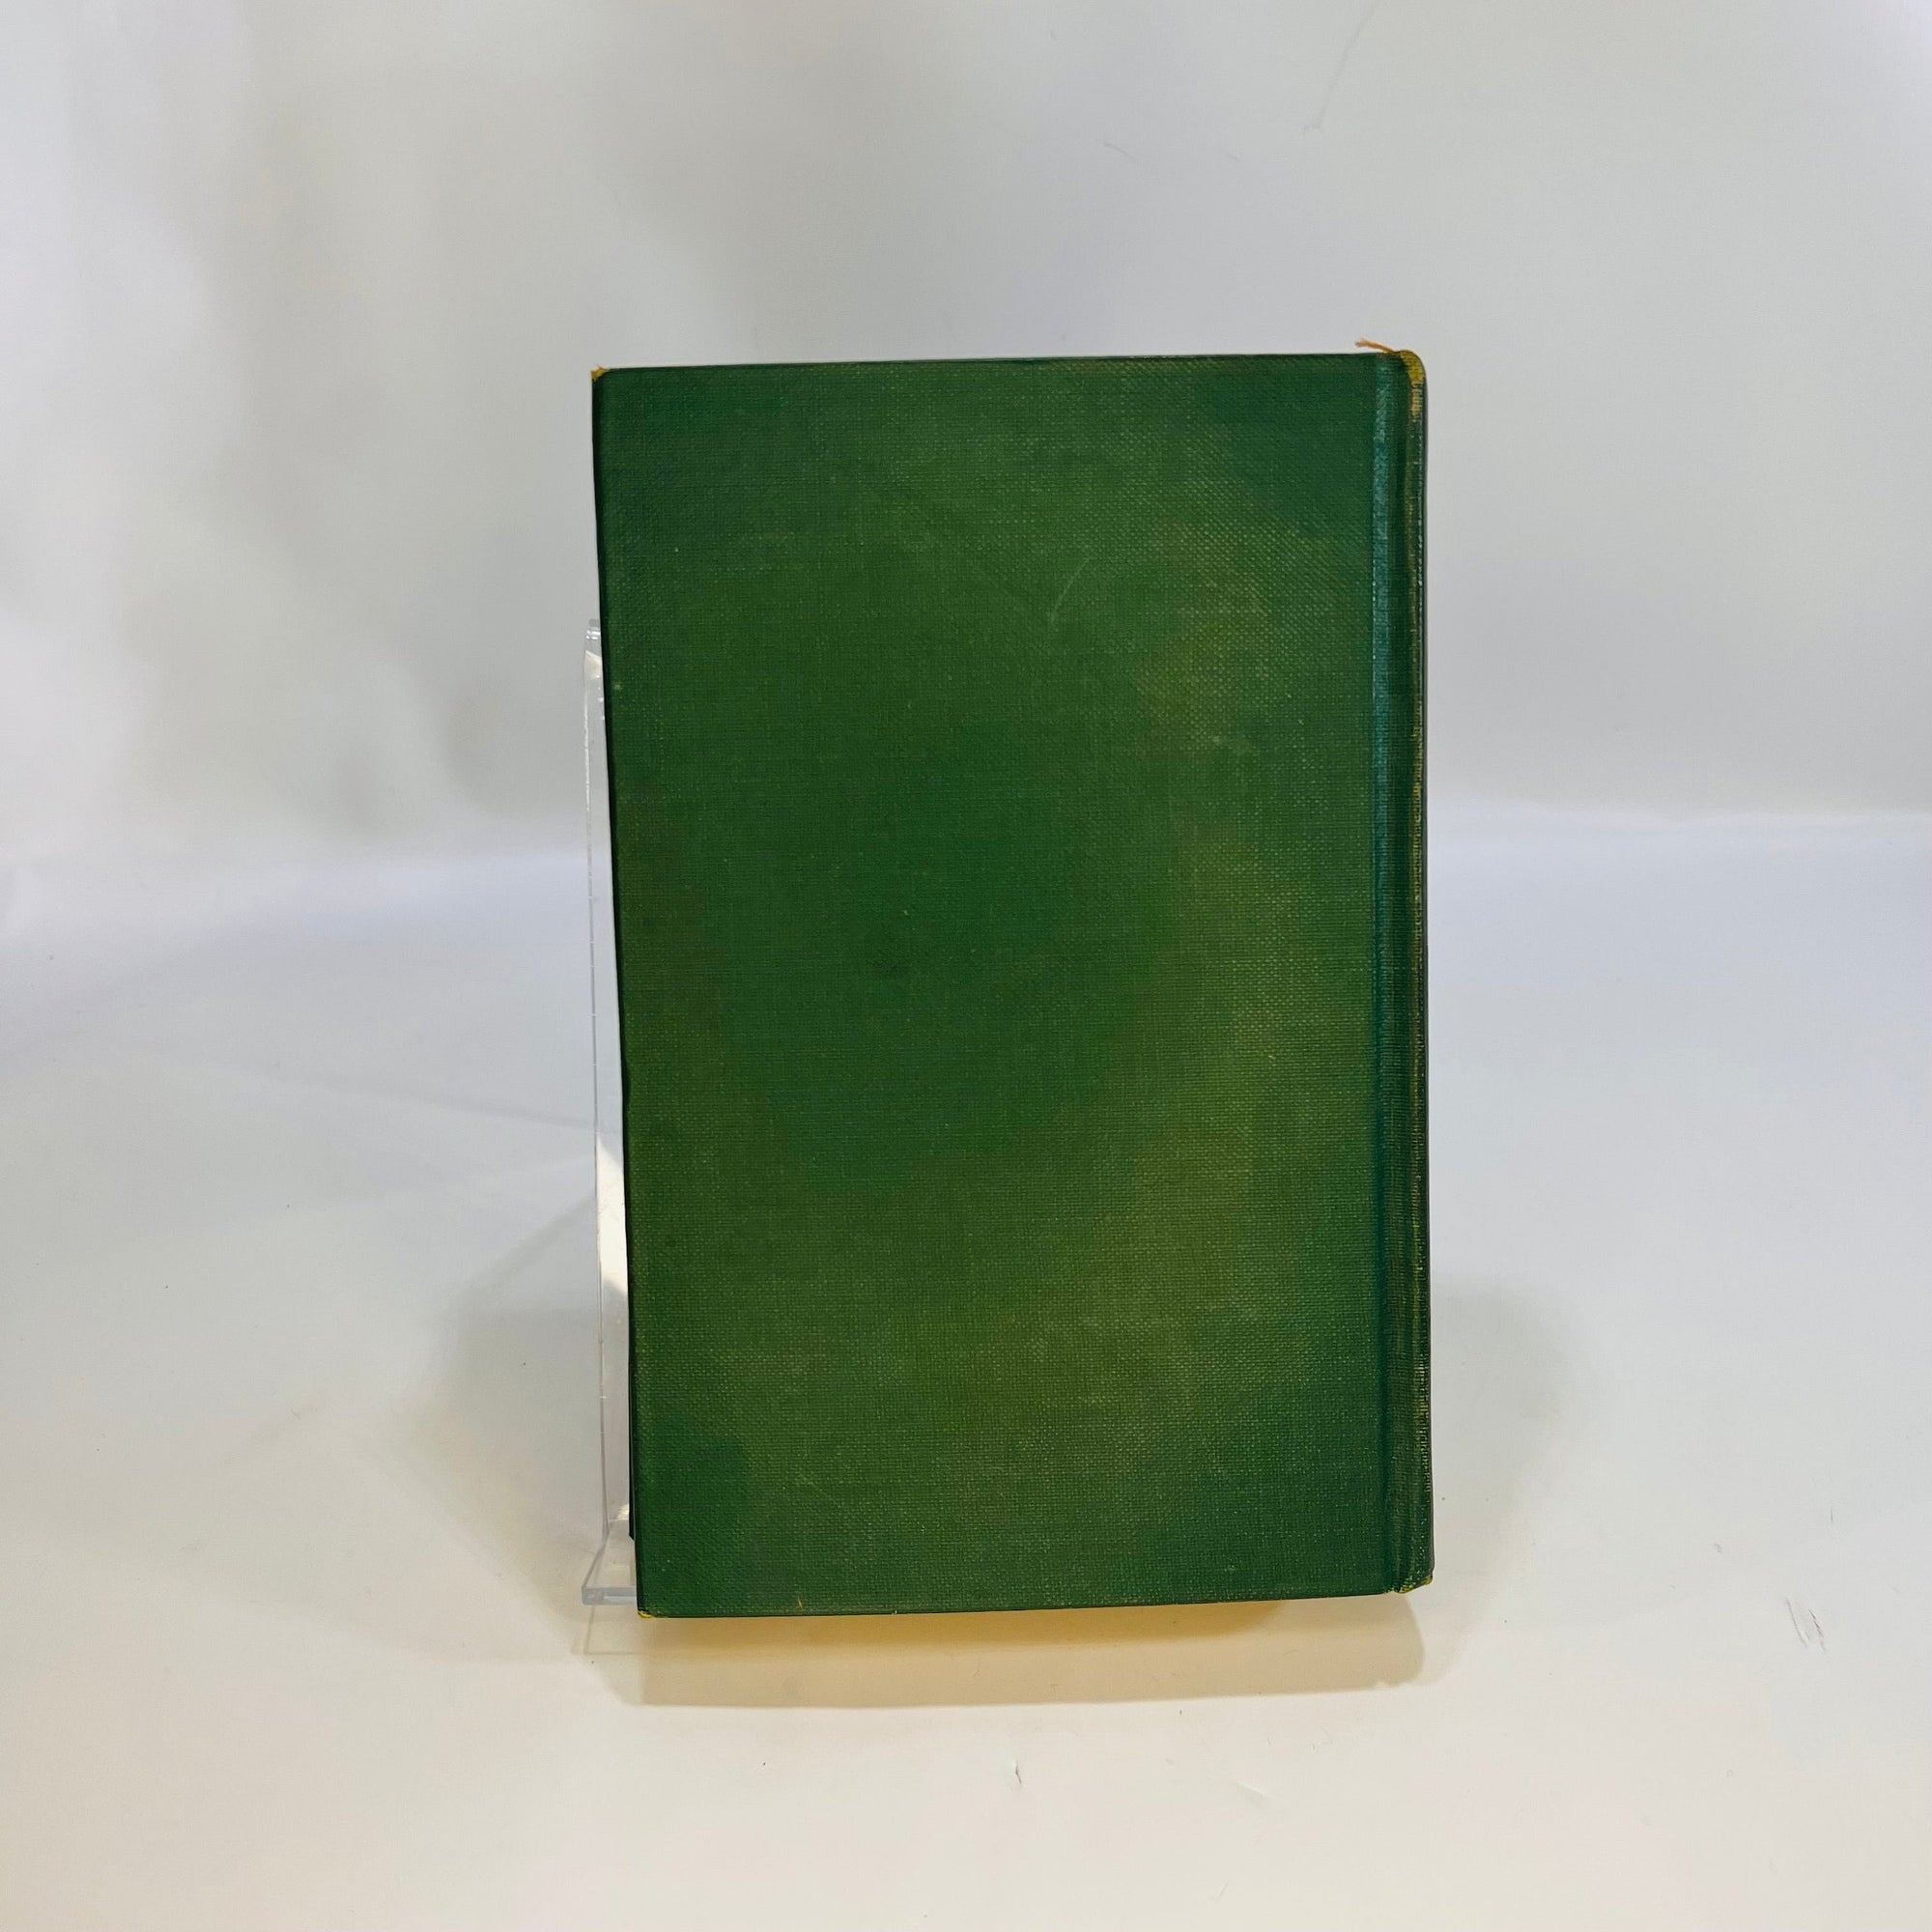 William Shakespeare A Handbook by Thomas Marc Parrott 1934 Charles Scribner'sSons Vintage Book